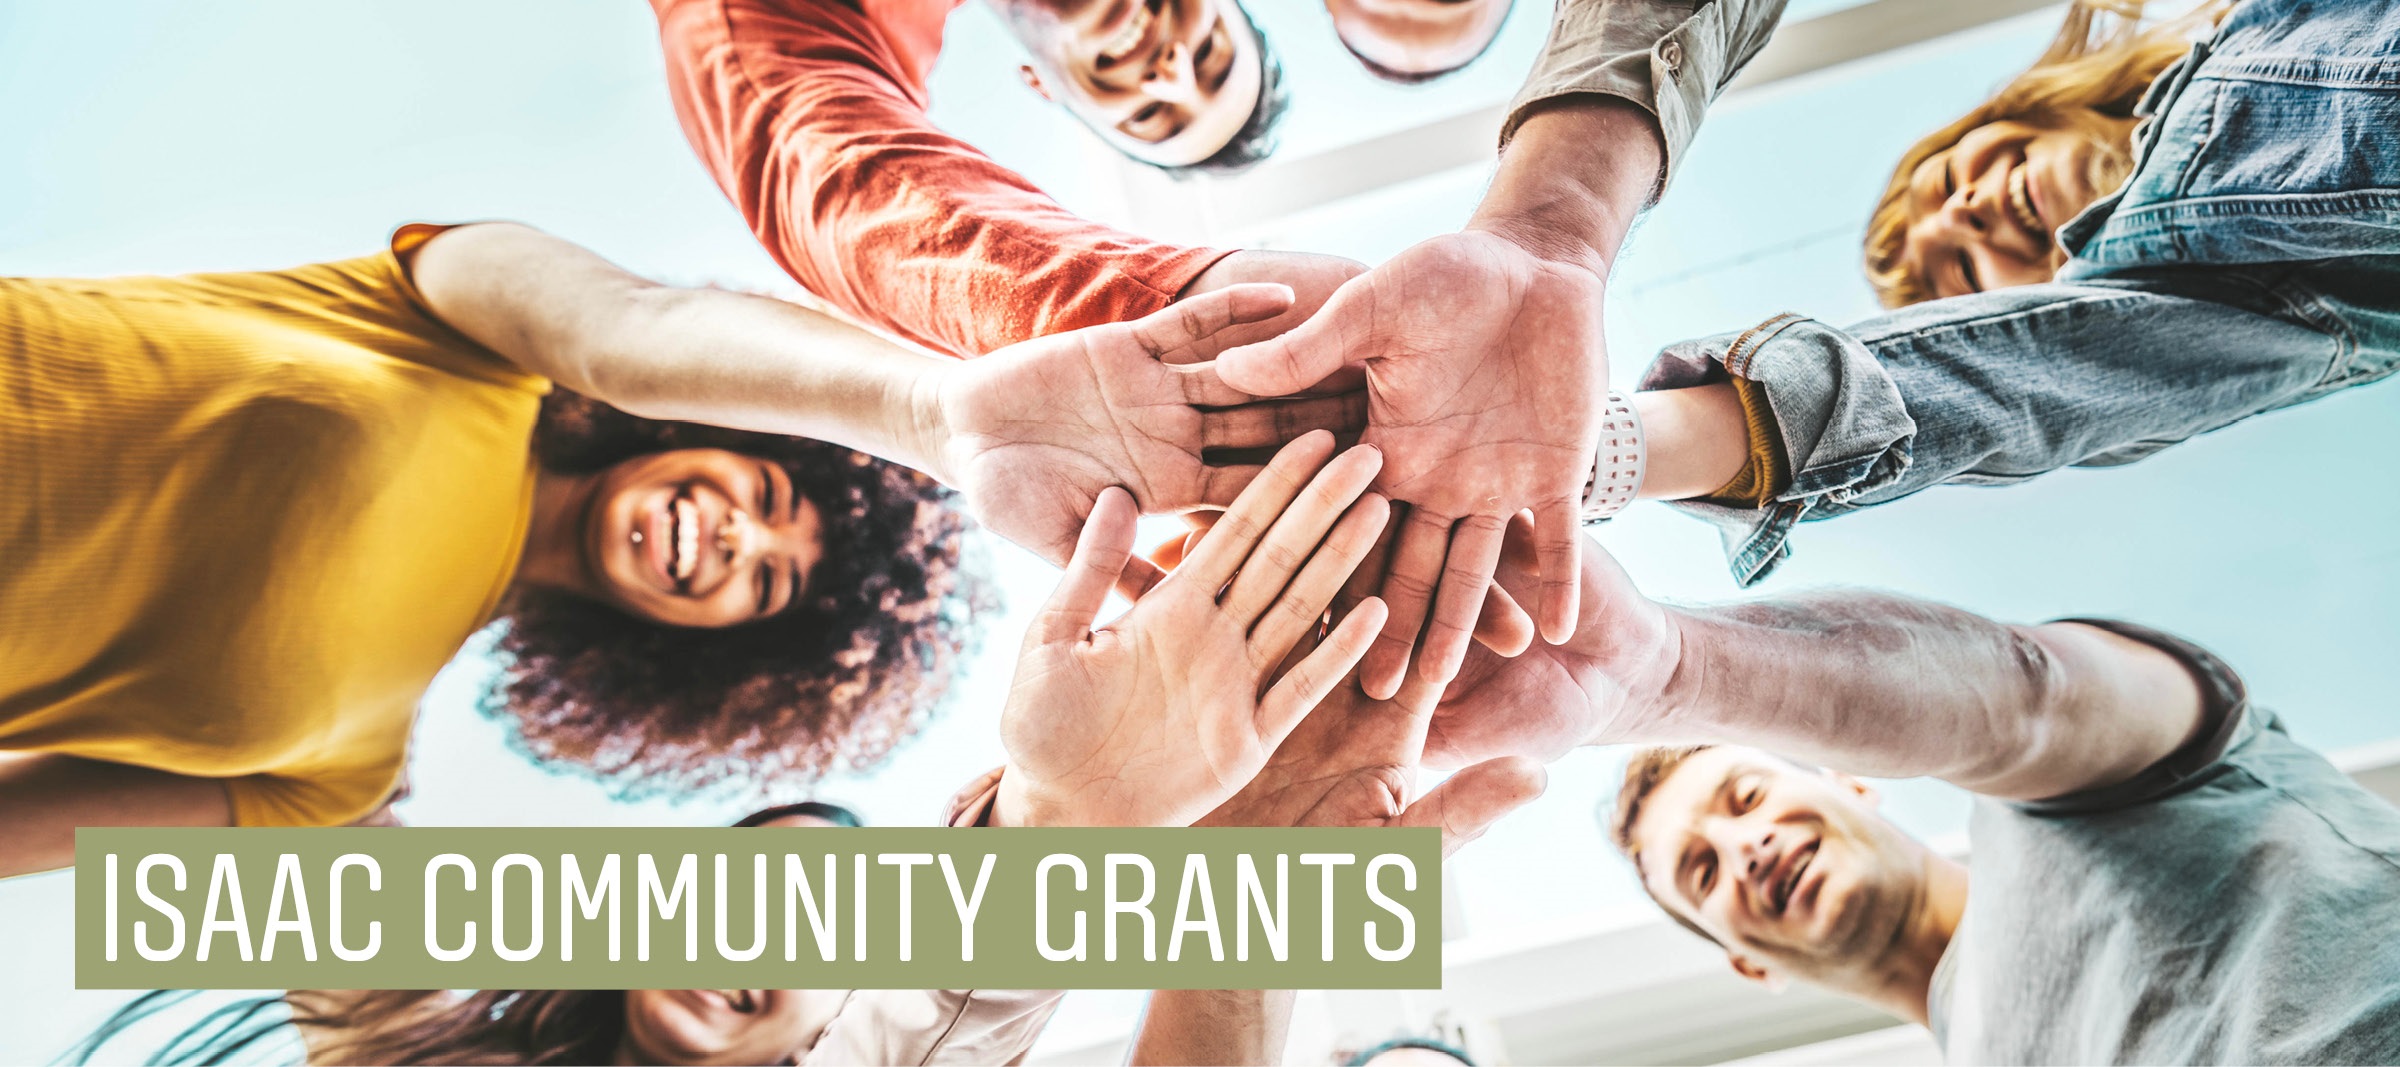 Community grants 2023-24 - page banner